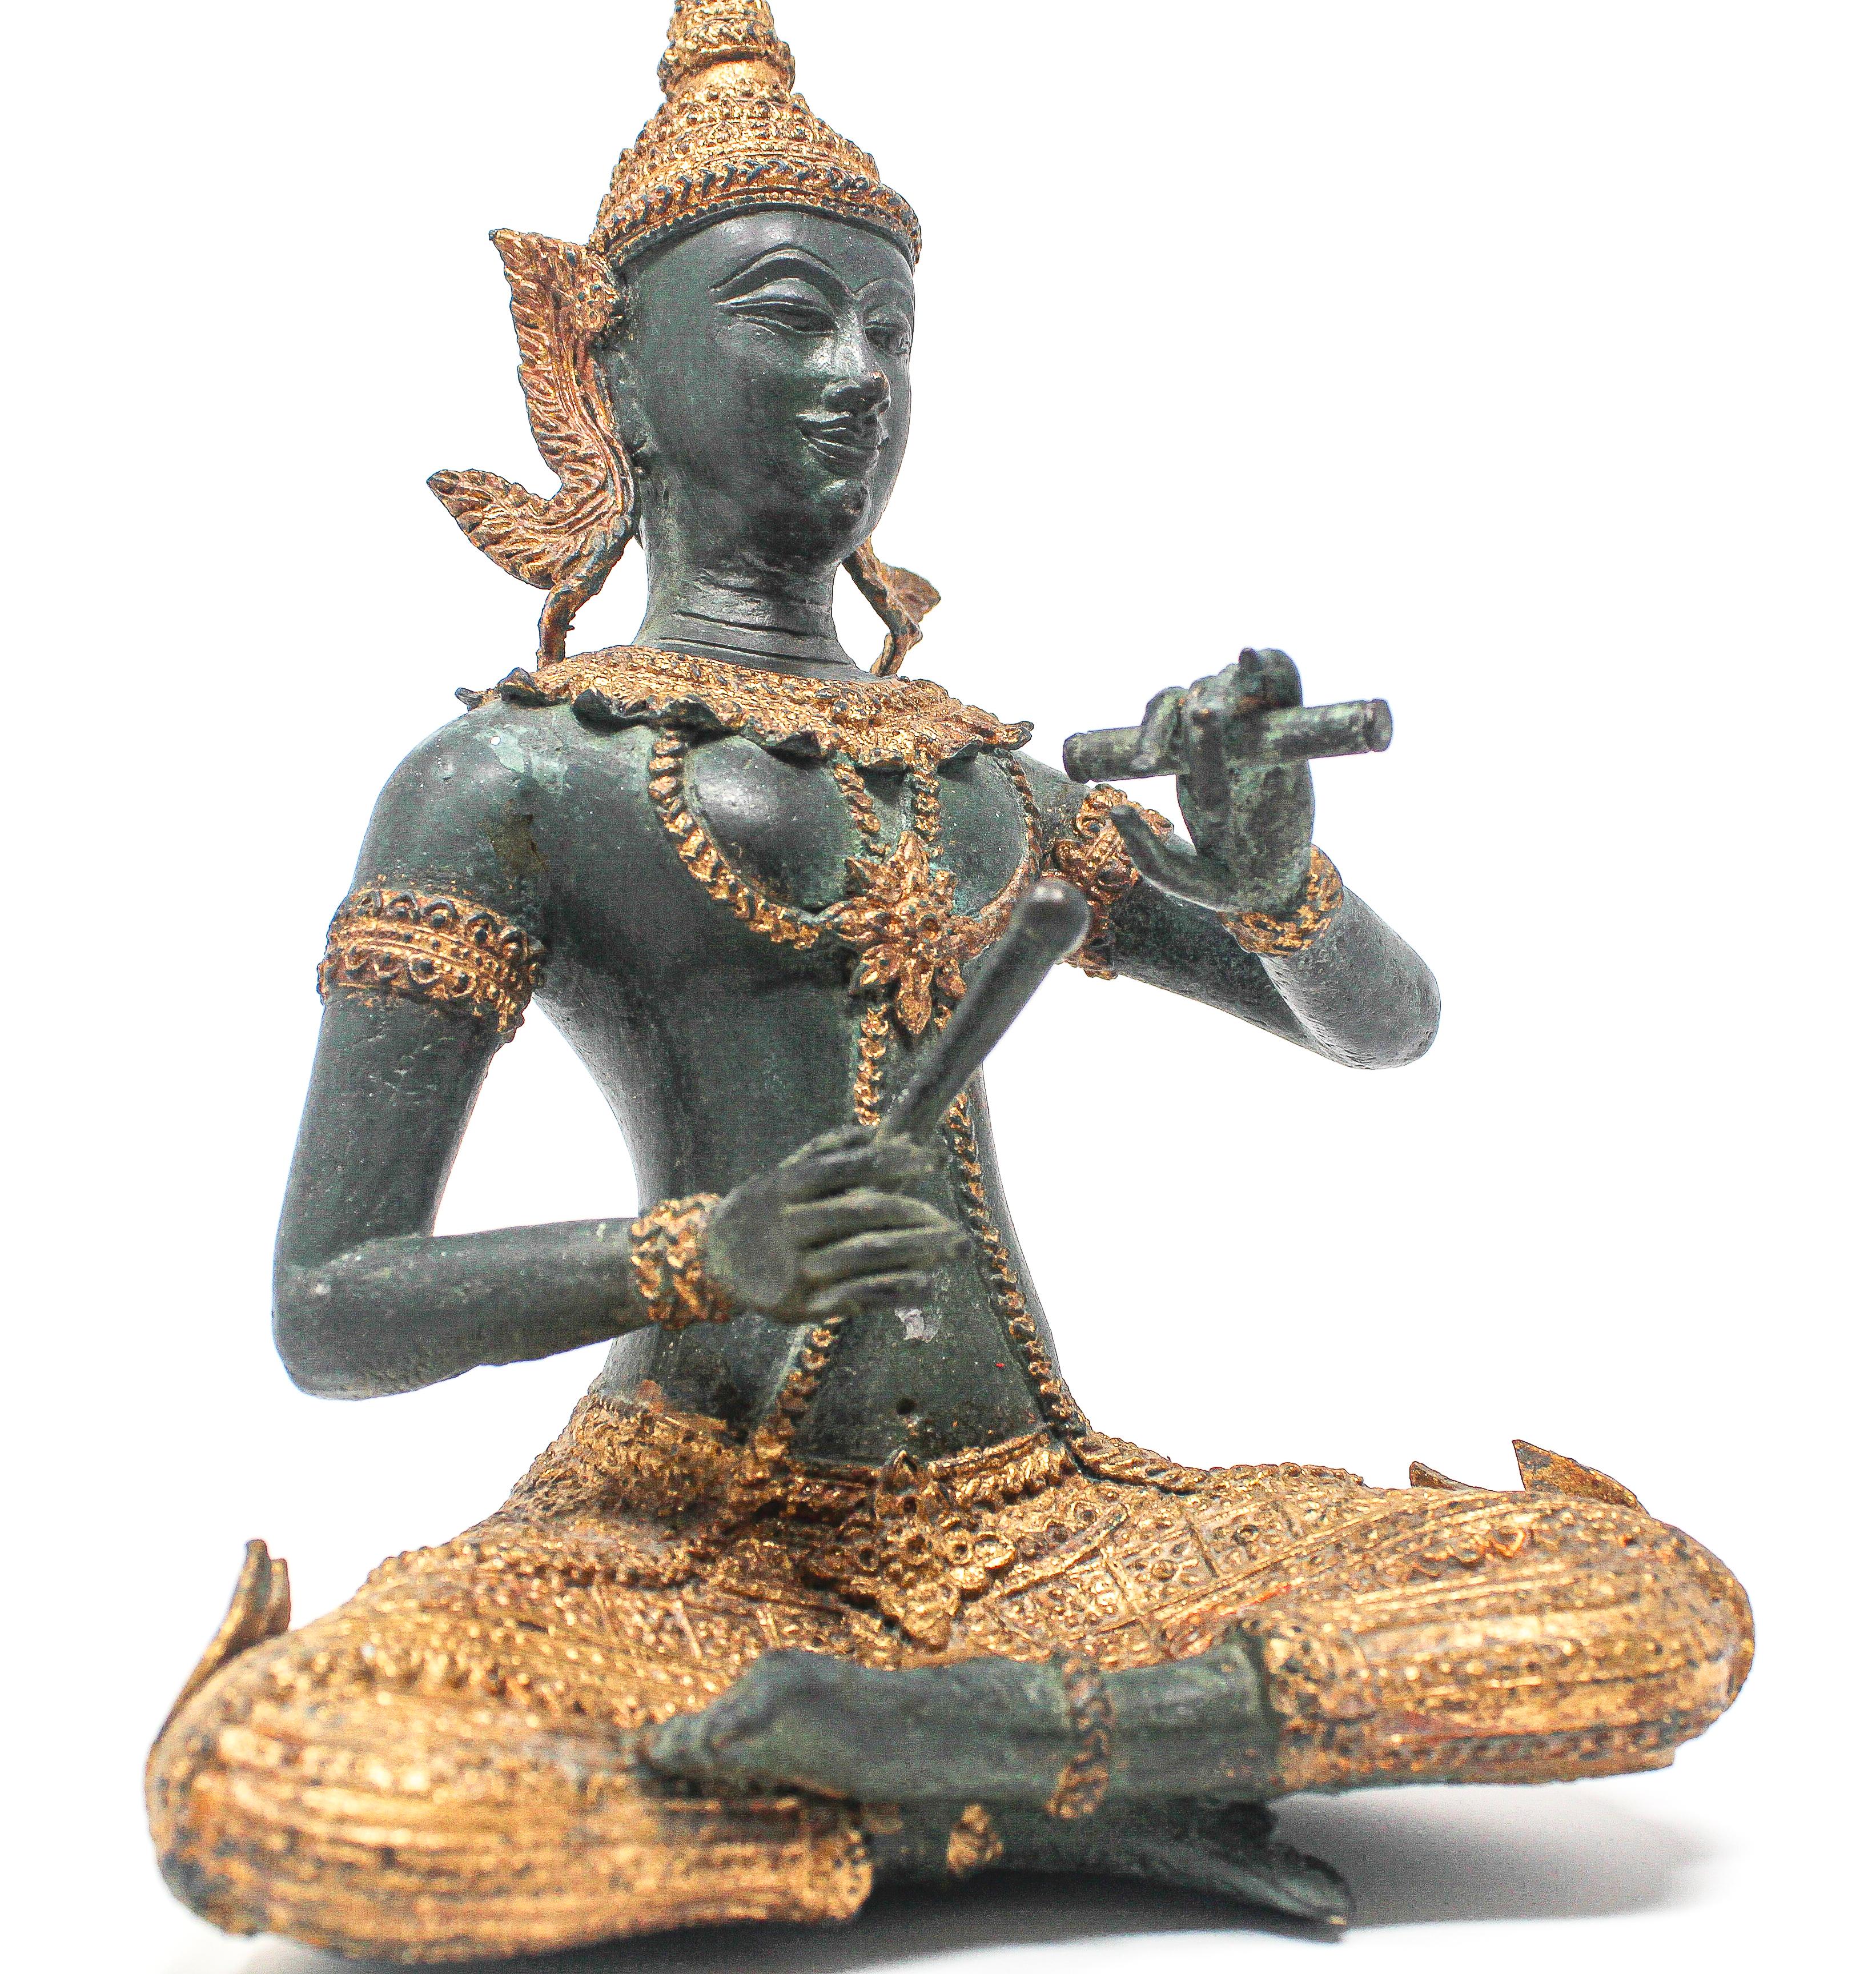 Asian gilt bronze statue of Prince Pra Apai Manee playing a traditional Asian instrument.
Intricate gilt bronze hand cast Buddha figure in dark green with gold leaf detailing, the ceremonial costume and the jewelry are adorned with gold